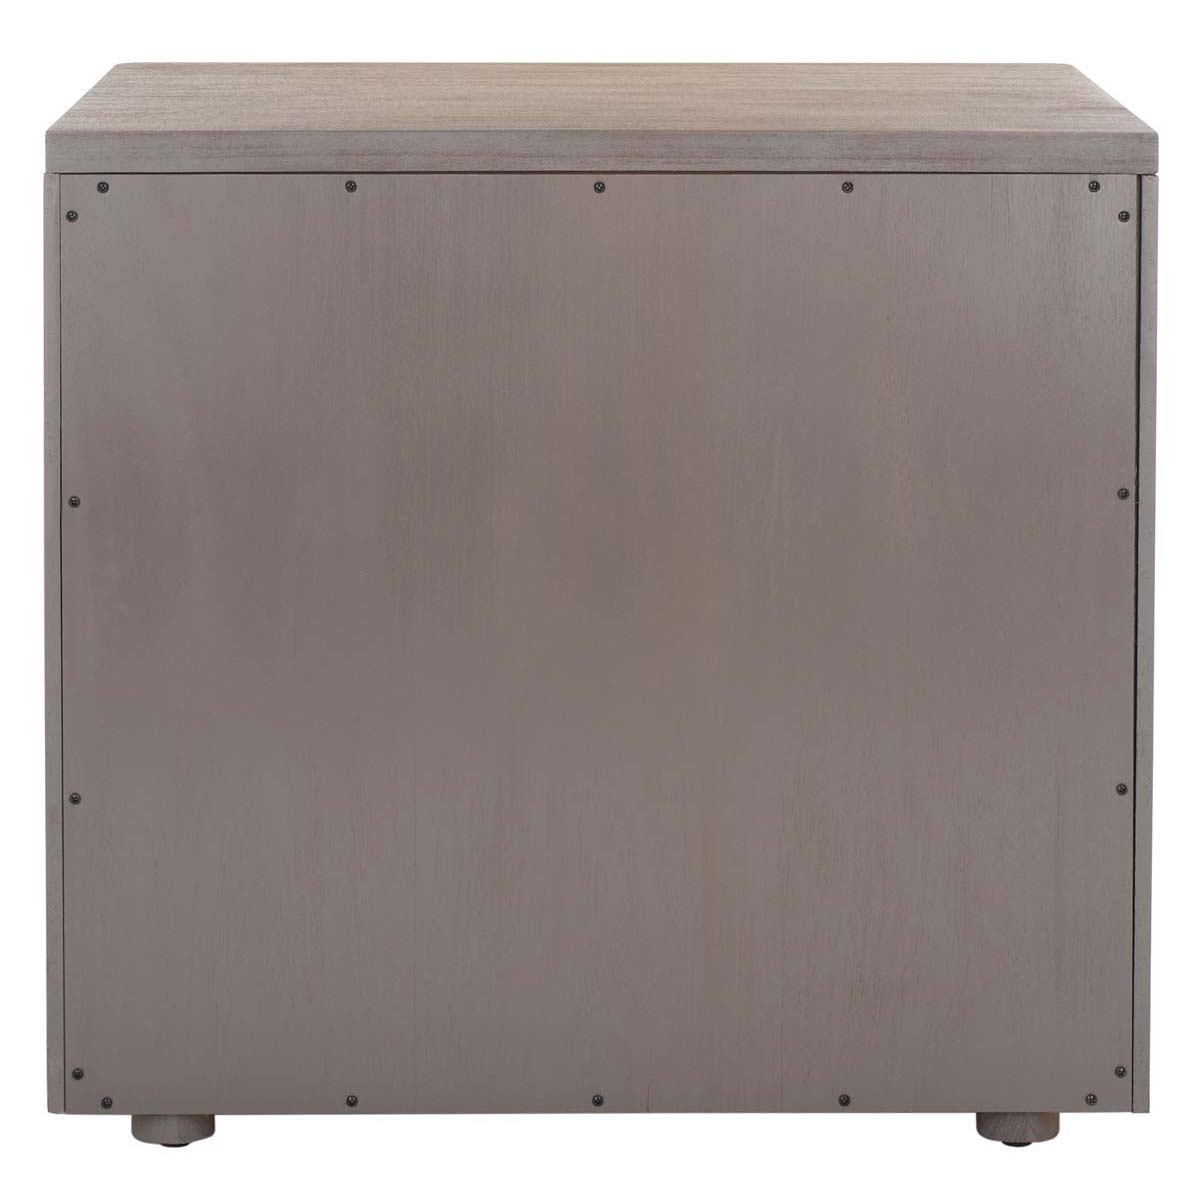 Safavieh Couture Rosey 3 Drawer Wood Nightstand - Light Brown